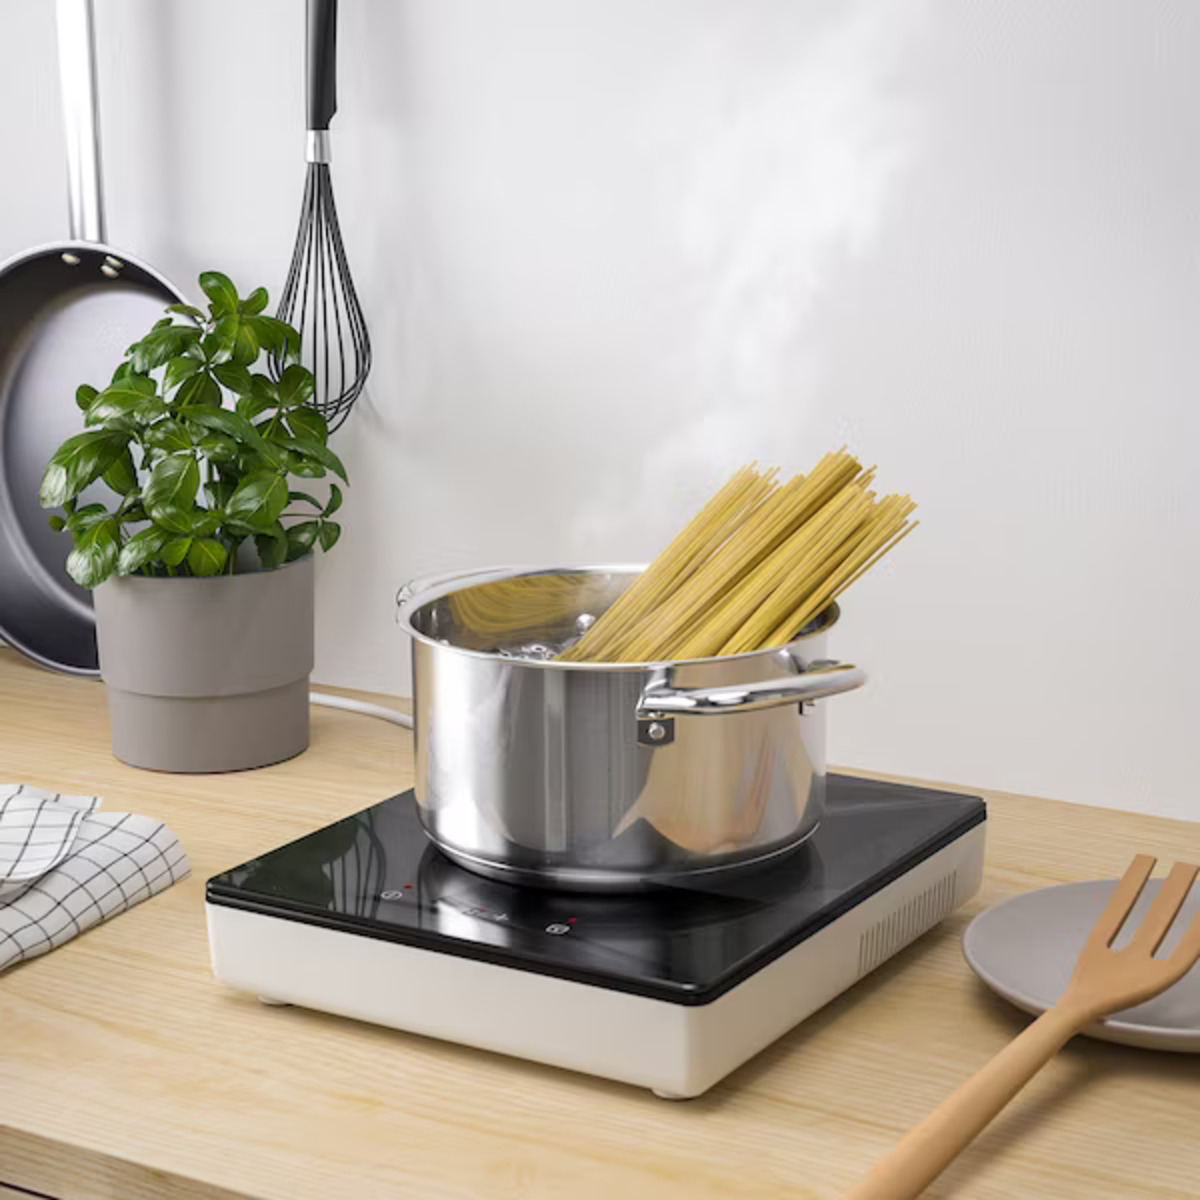 Which Portable Induction Cooktop Is Best